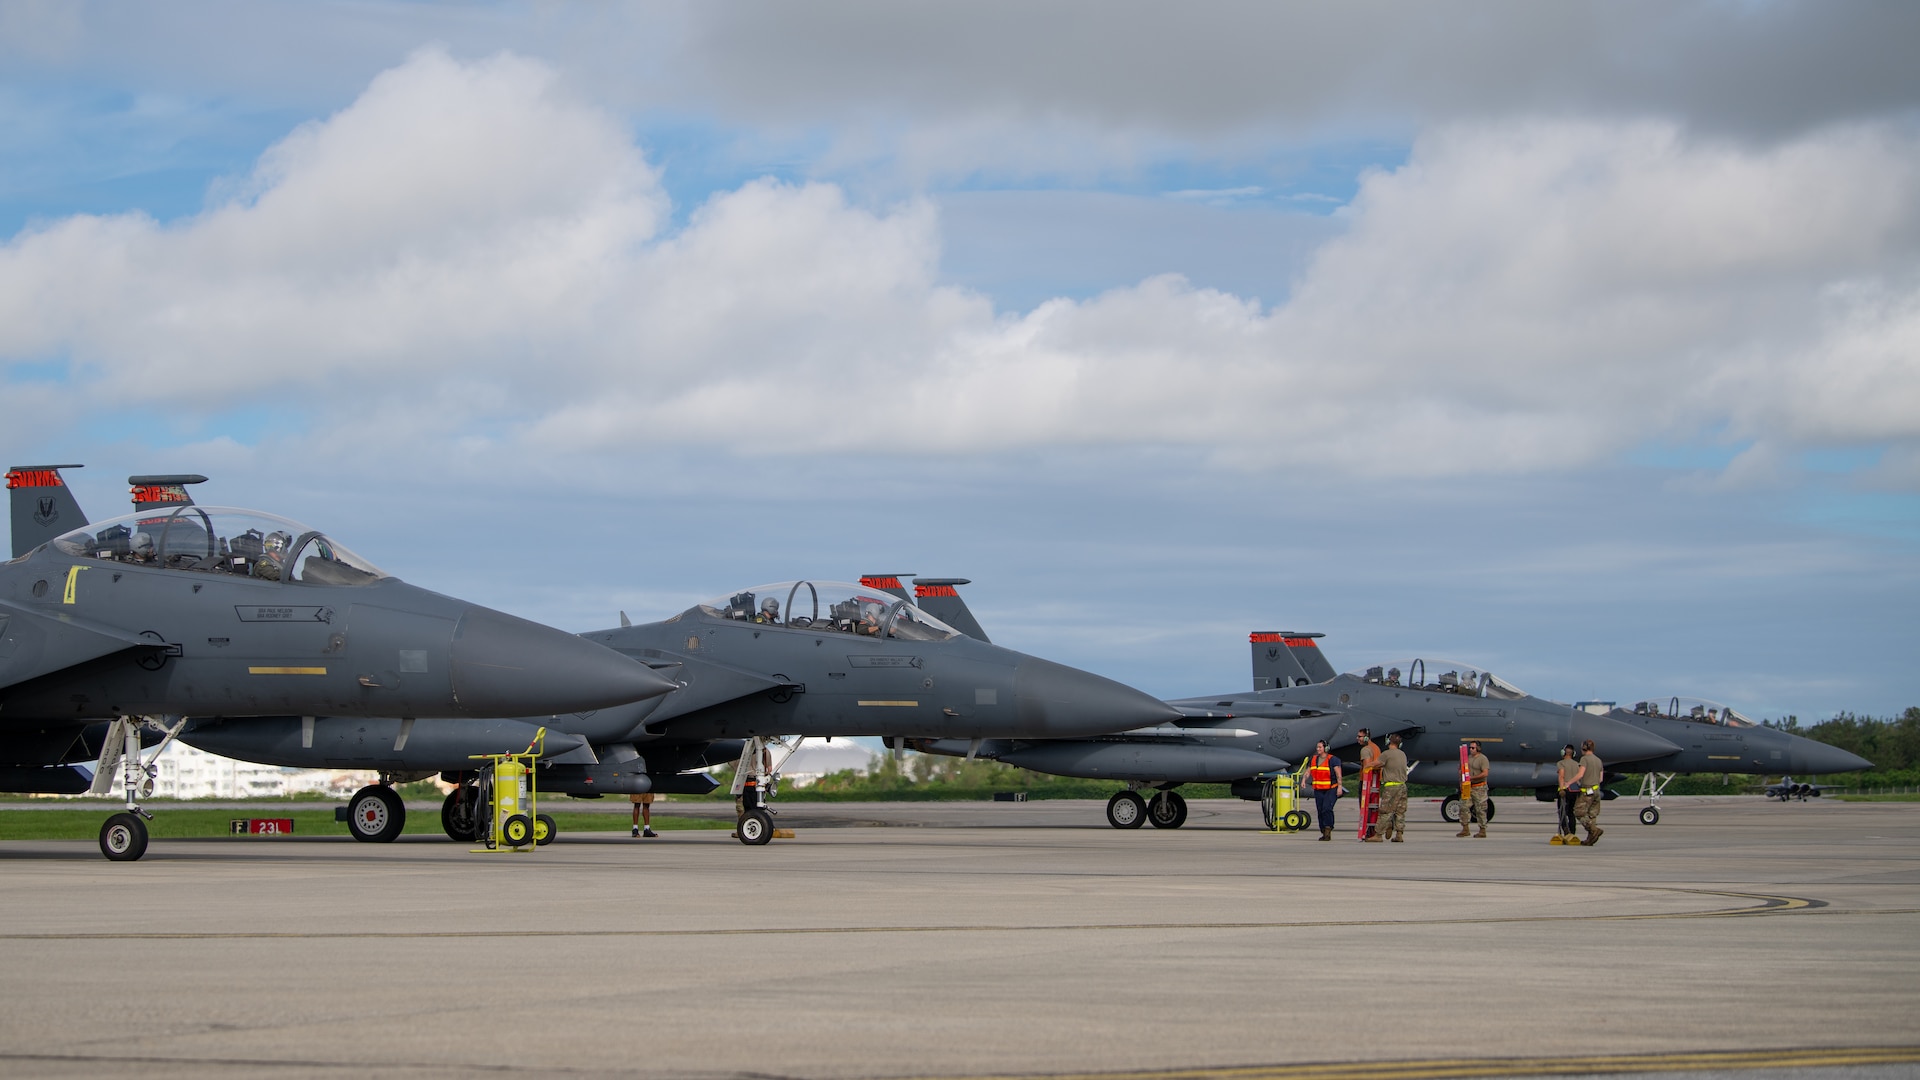 F-15E Strike Eagles assigned to the 391st Fighter Squadron hold on the arming pad during a no-notice fighter dispersal exercise at Kadena Air Base, Japan, Sept. 22, 2023. Large-scale airpower generation exercises ensure Kadena-based Airmen and assets remain postured to deter, deny and defeat any threat to regional stability in the Indo-Pacific. (U.S. Air Force photo by Staff Sgt. Jessi Roth)